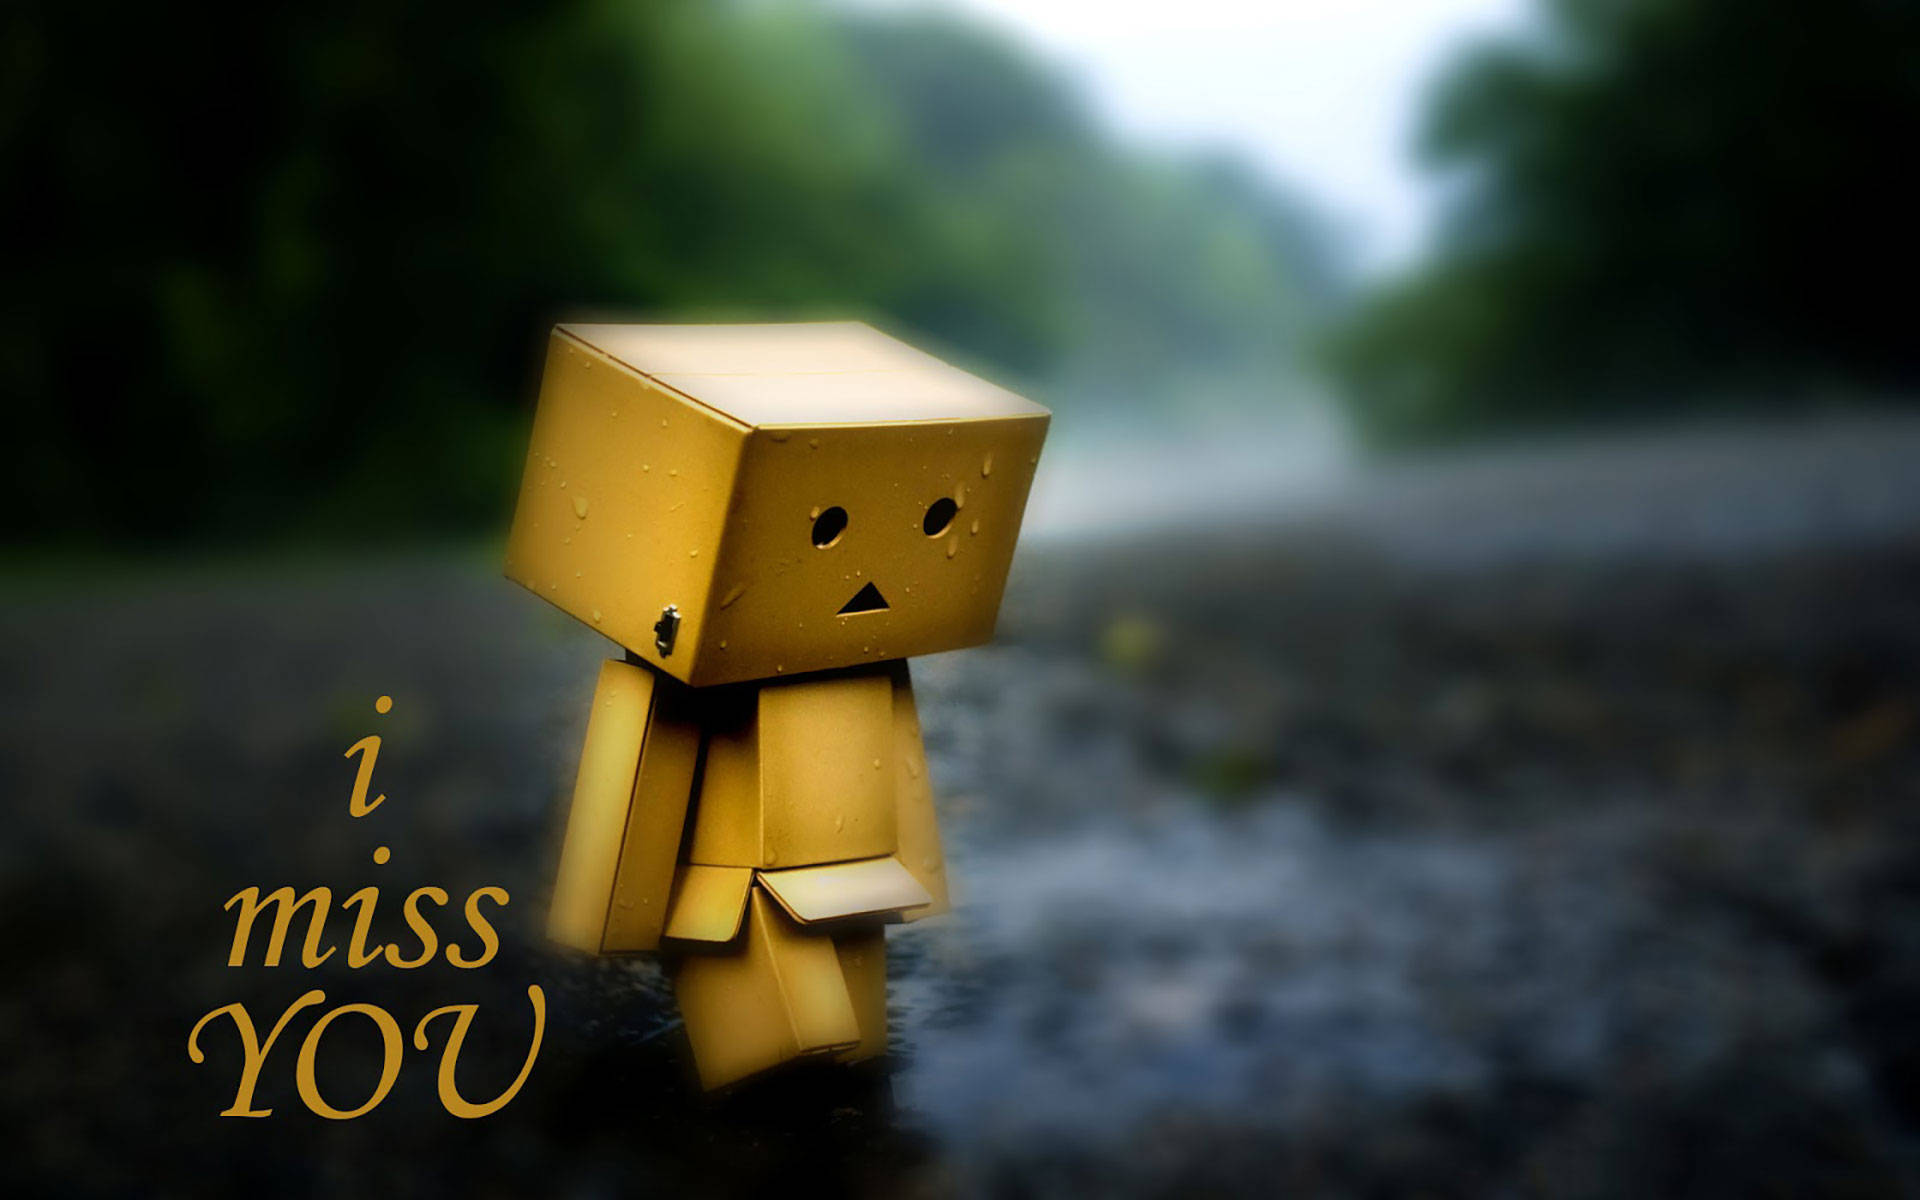 Missing You Box Toy Wallpaper